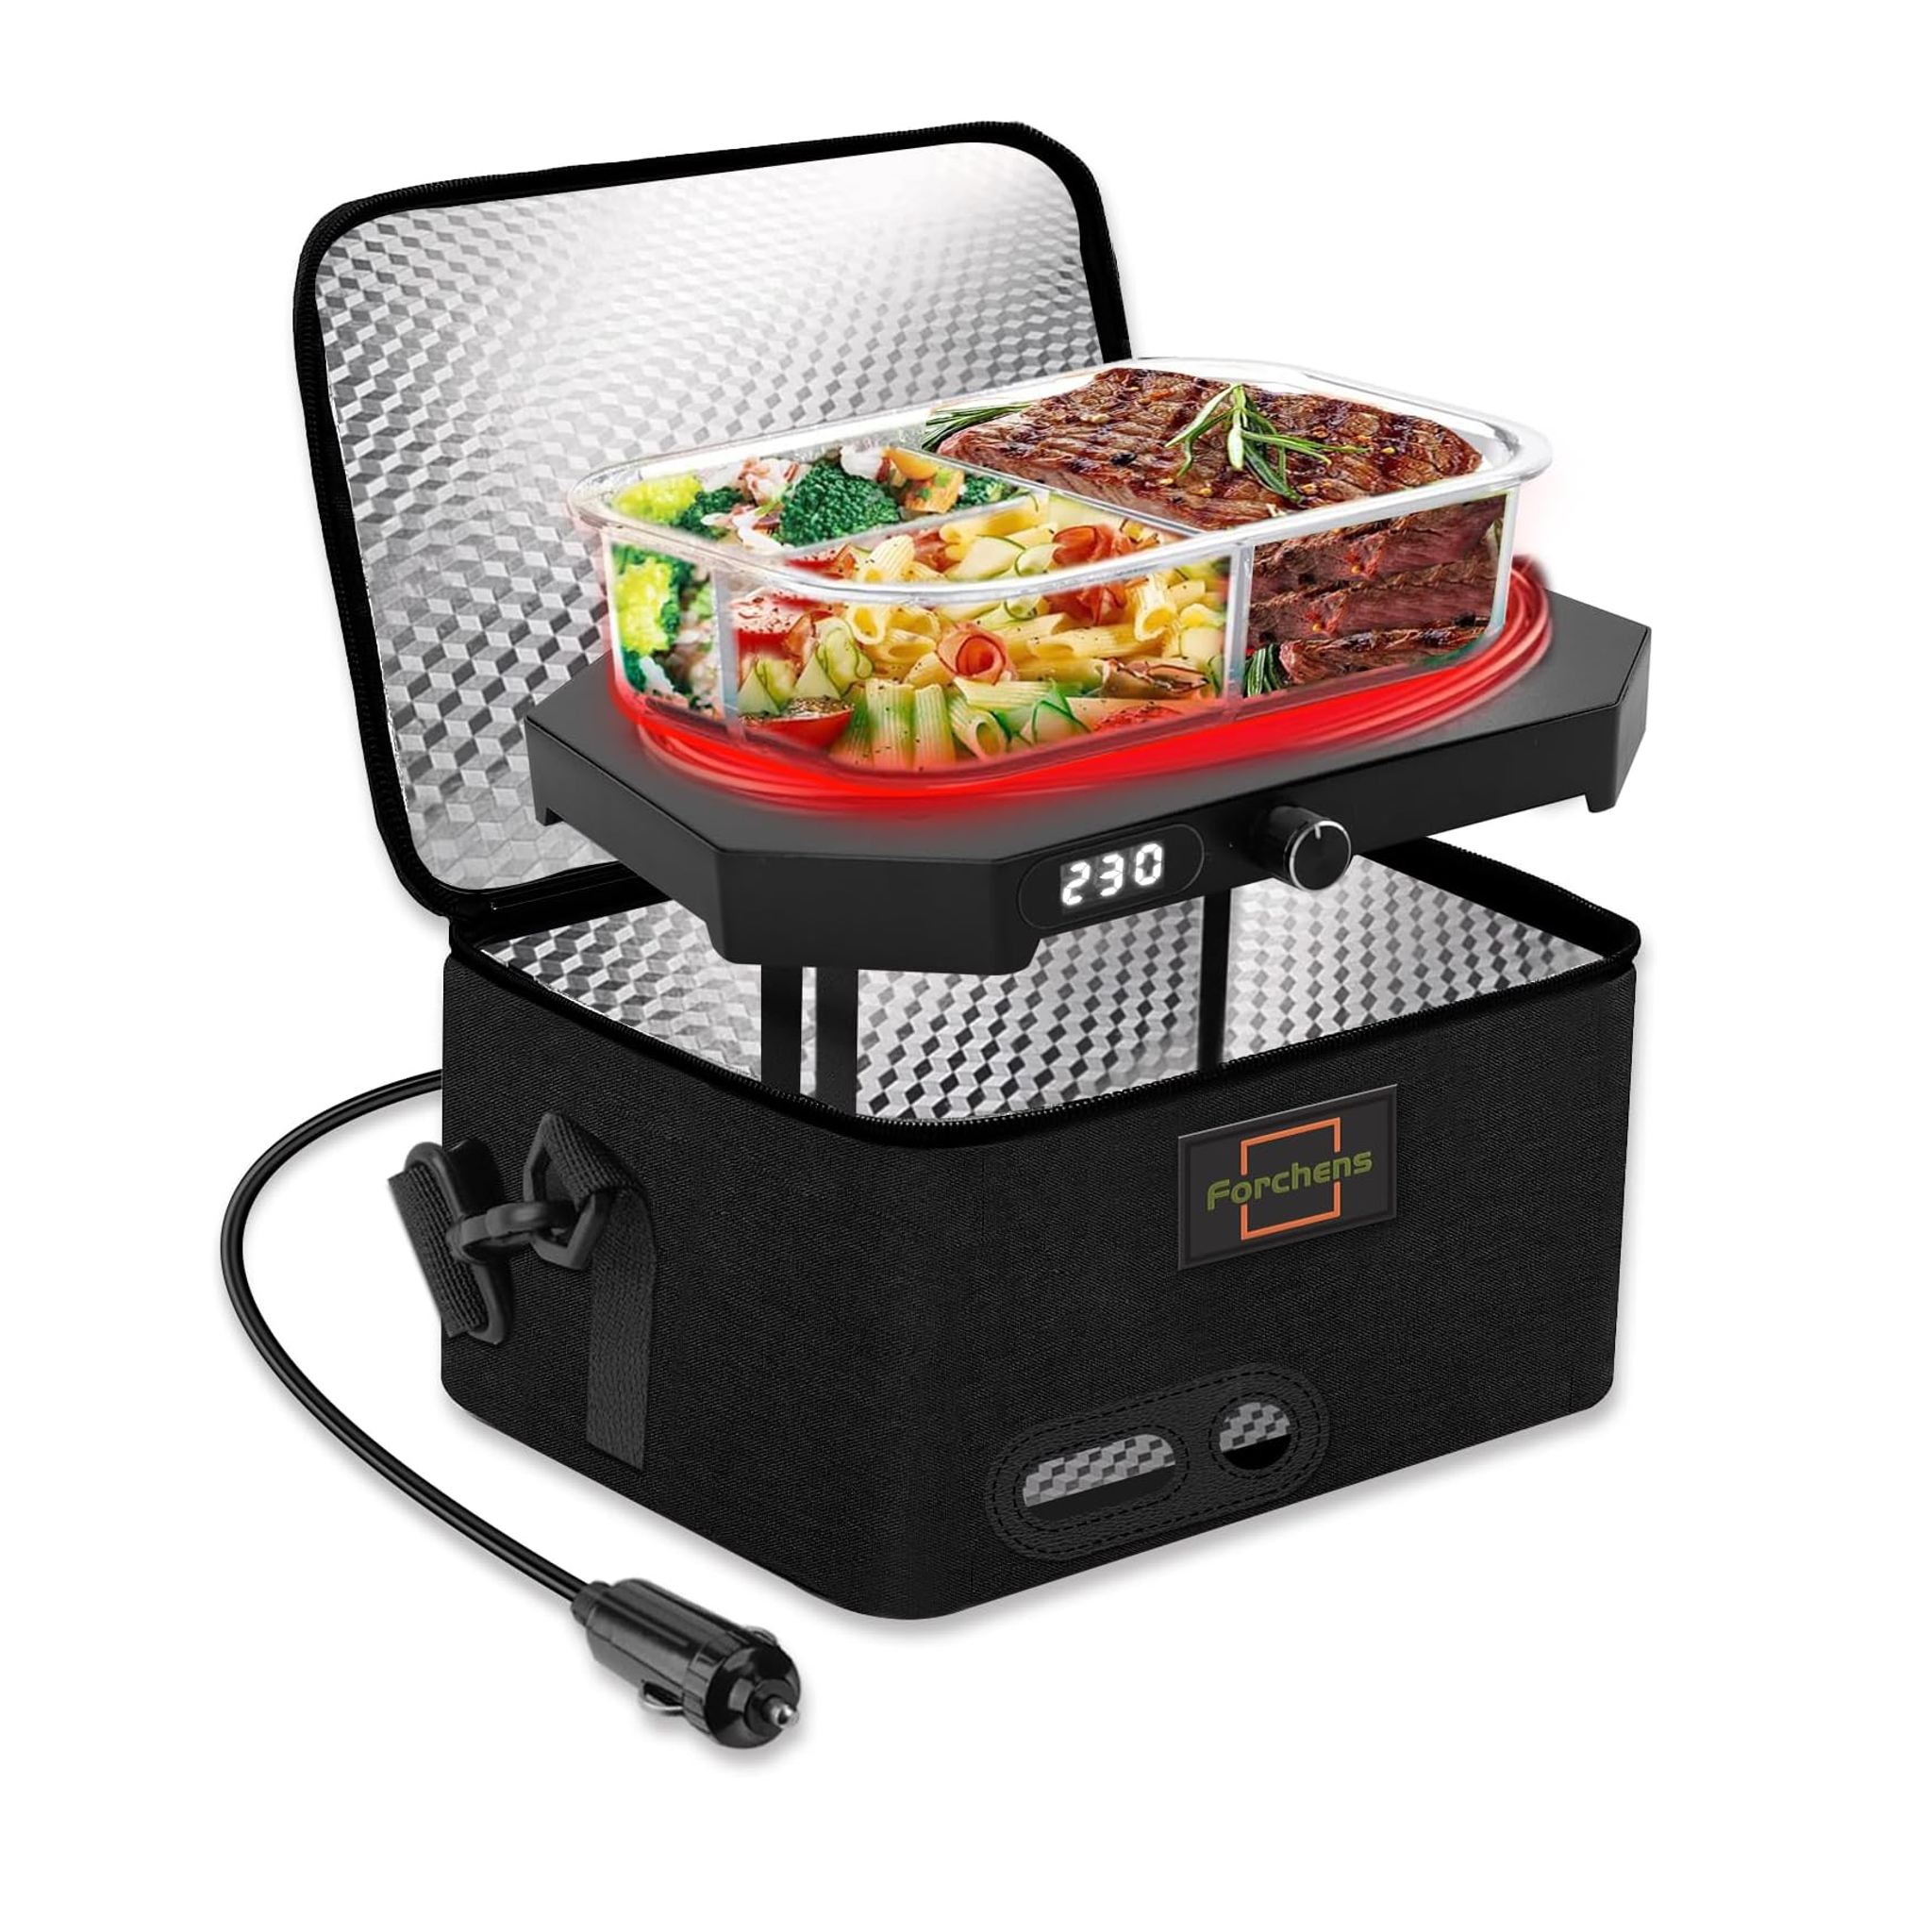 Portable Heated Lunch Box With Digital Display & Auto Temperature Control